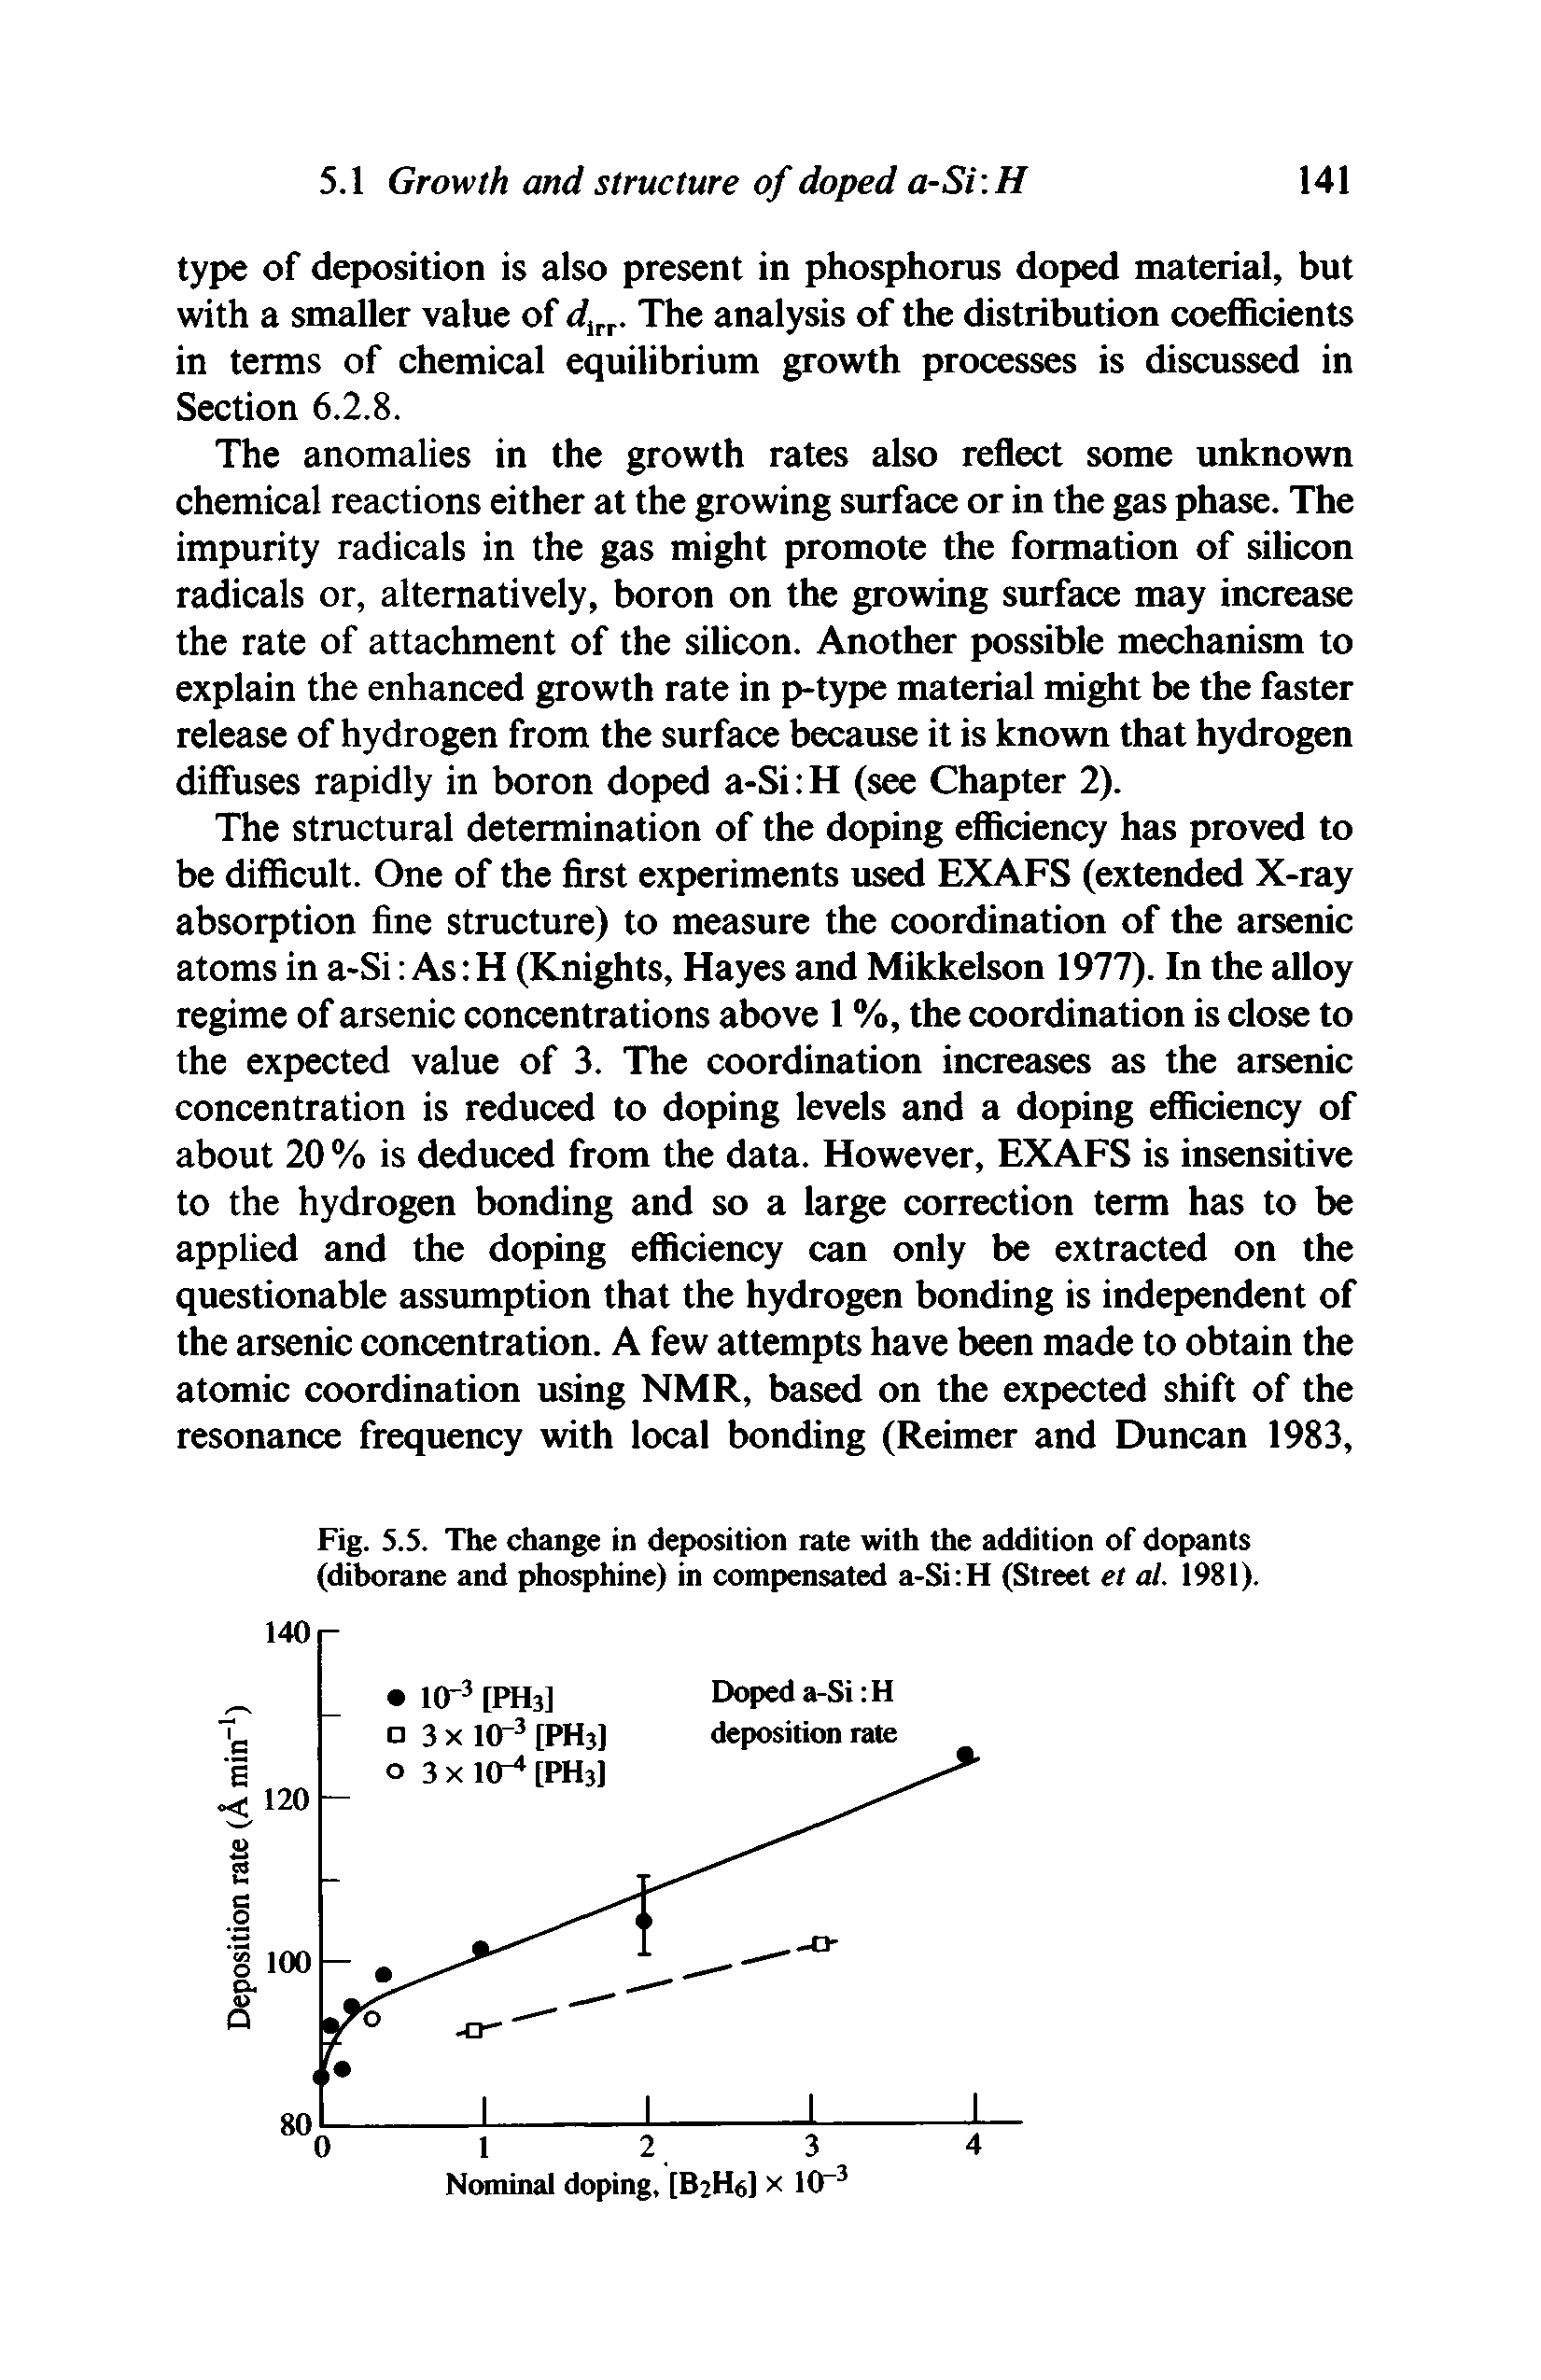 Fig. S.S. The change in deposition rate with the addition of dopants (diborane and phosphine) in compensated a-Si H (Street et at. 1981).